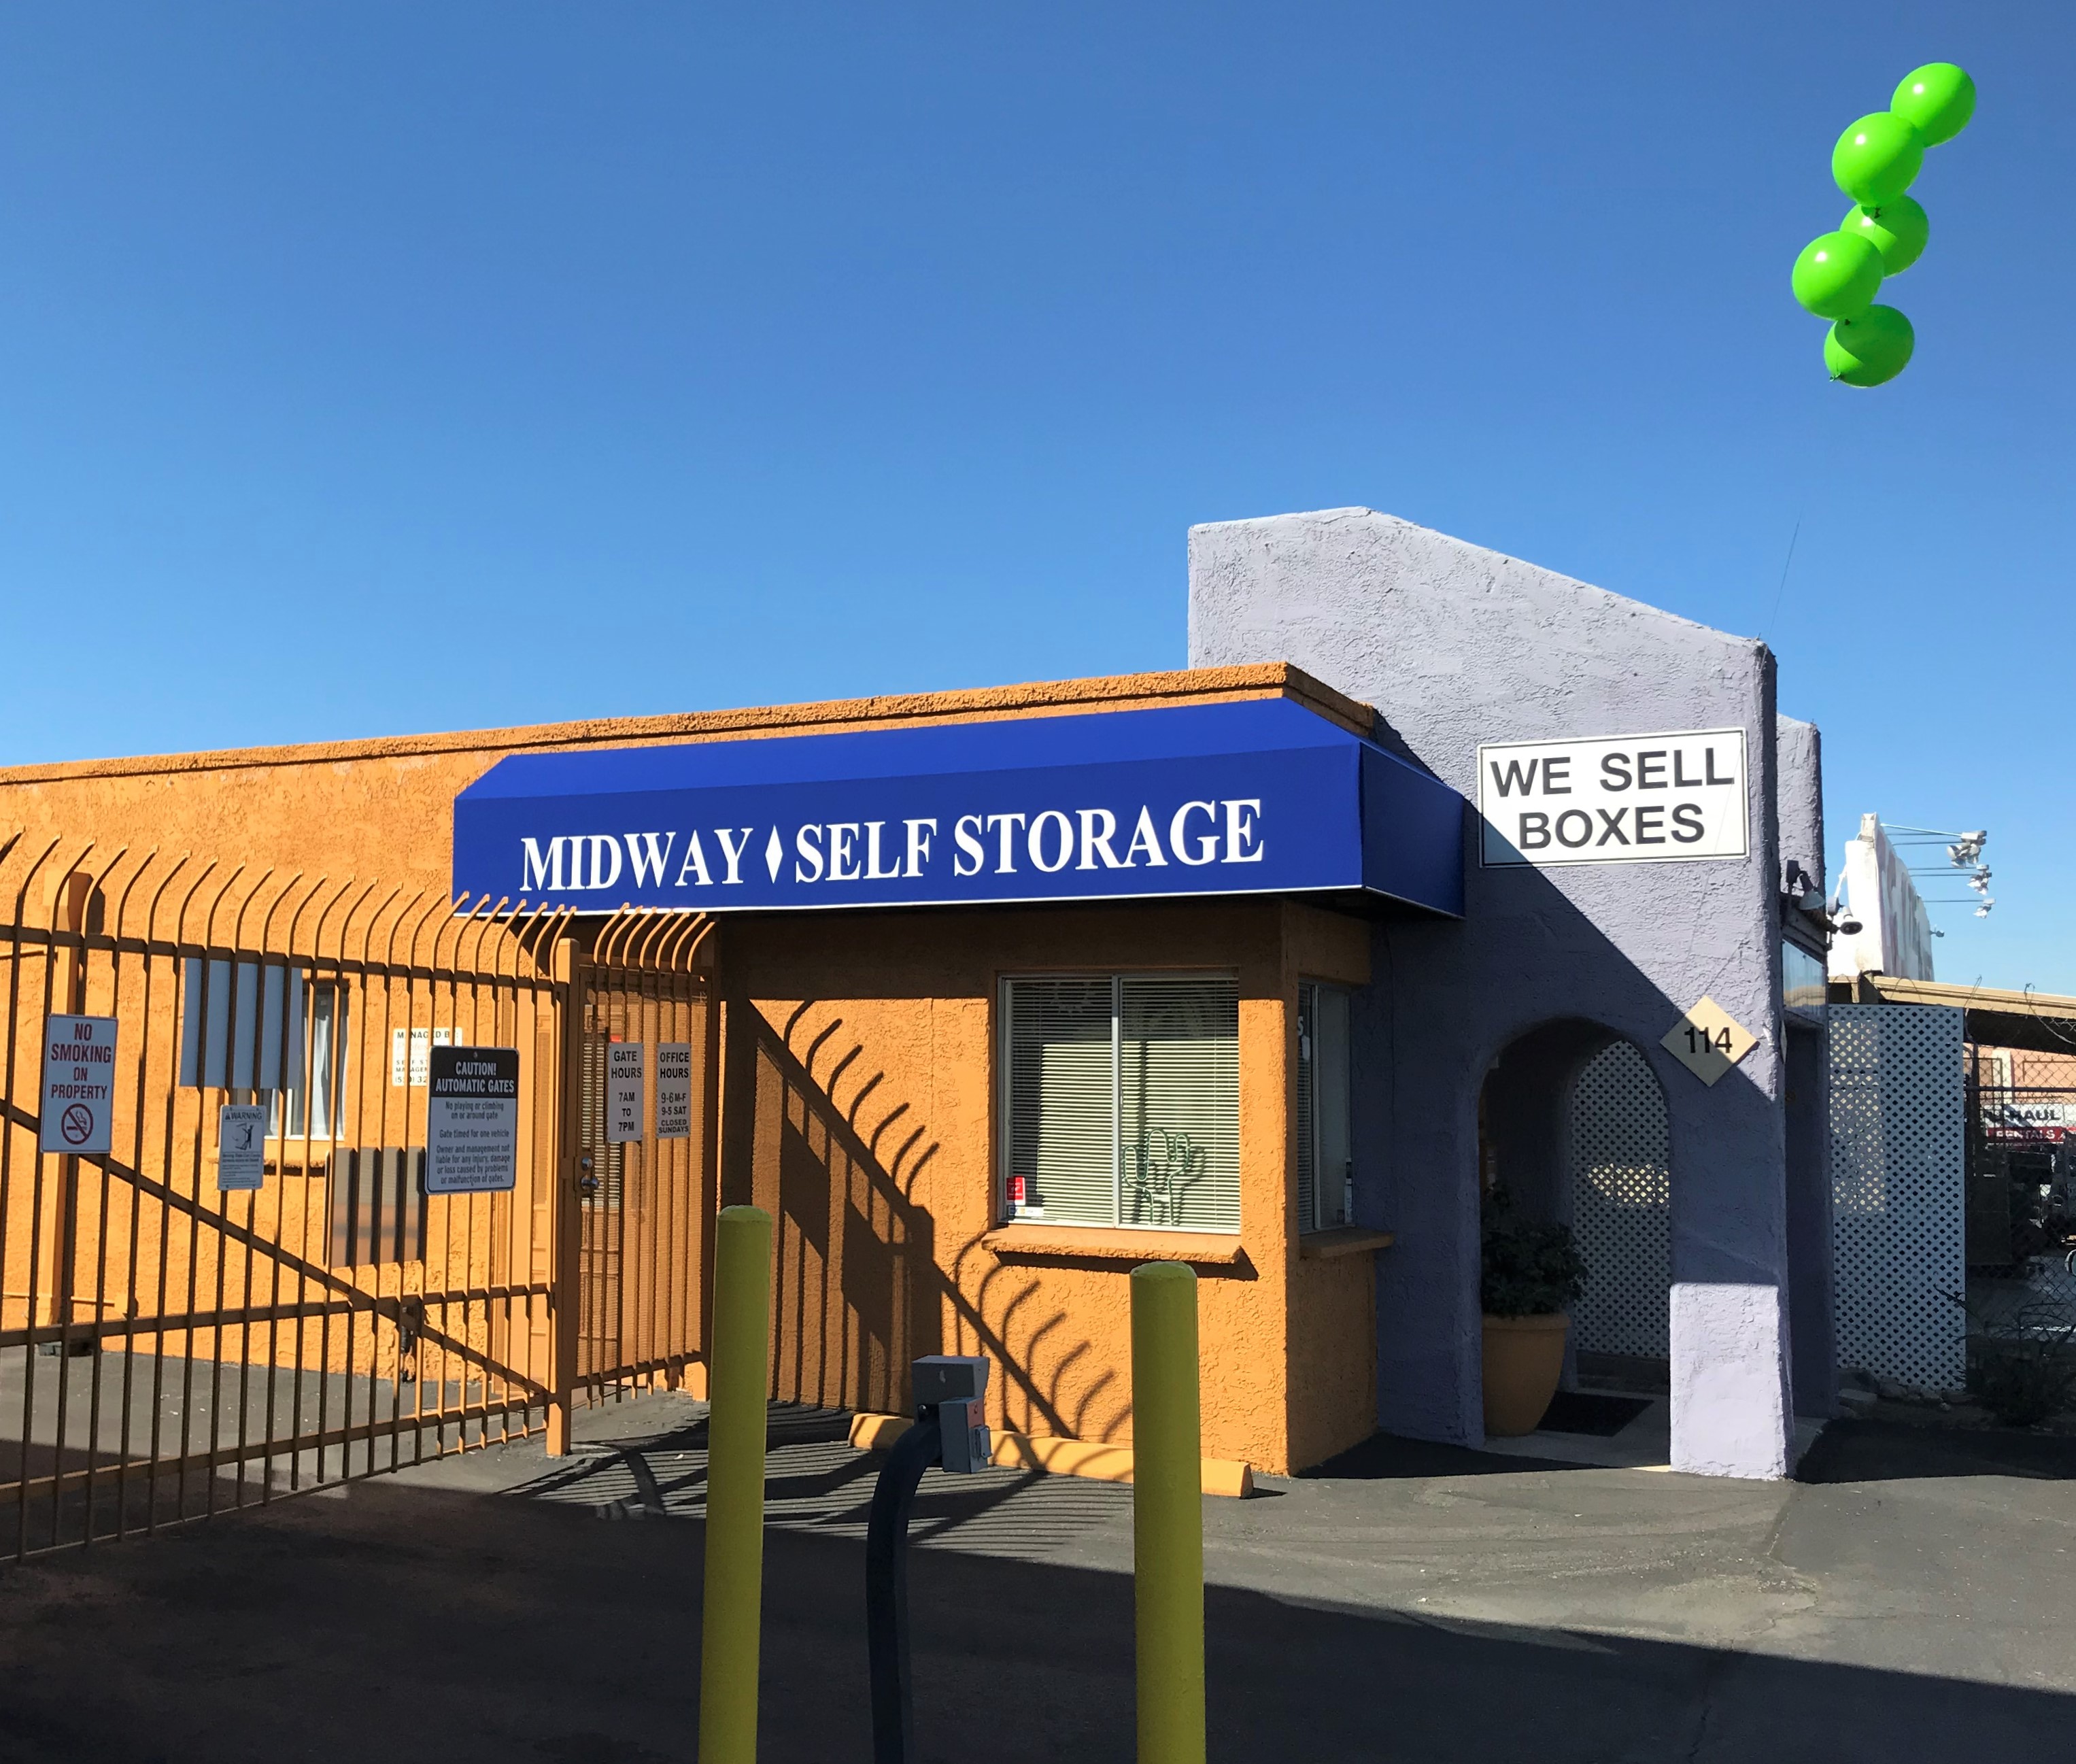 Office for Midway Self Storage in Tucson, AZ 